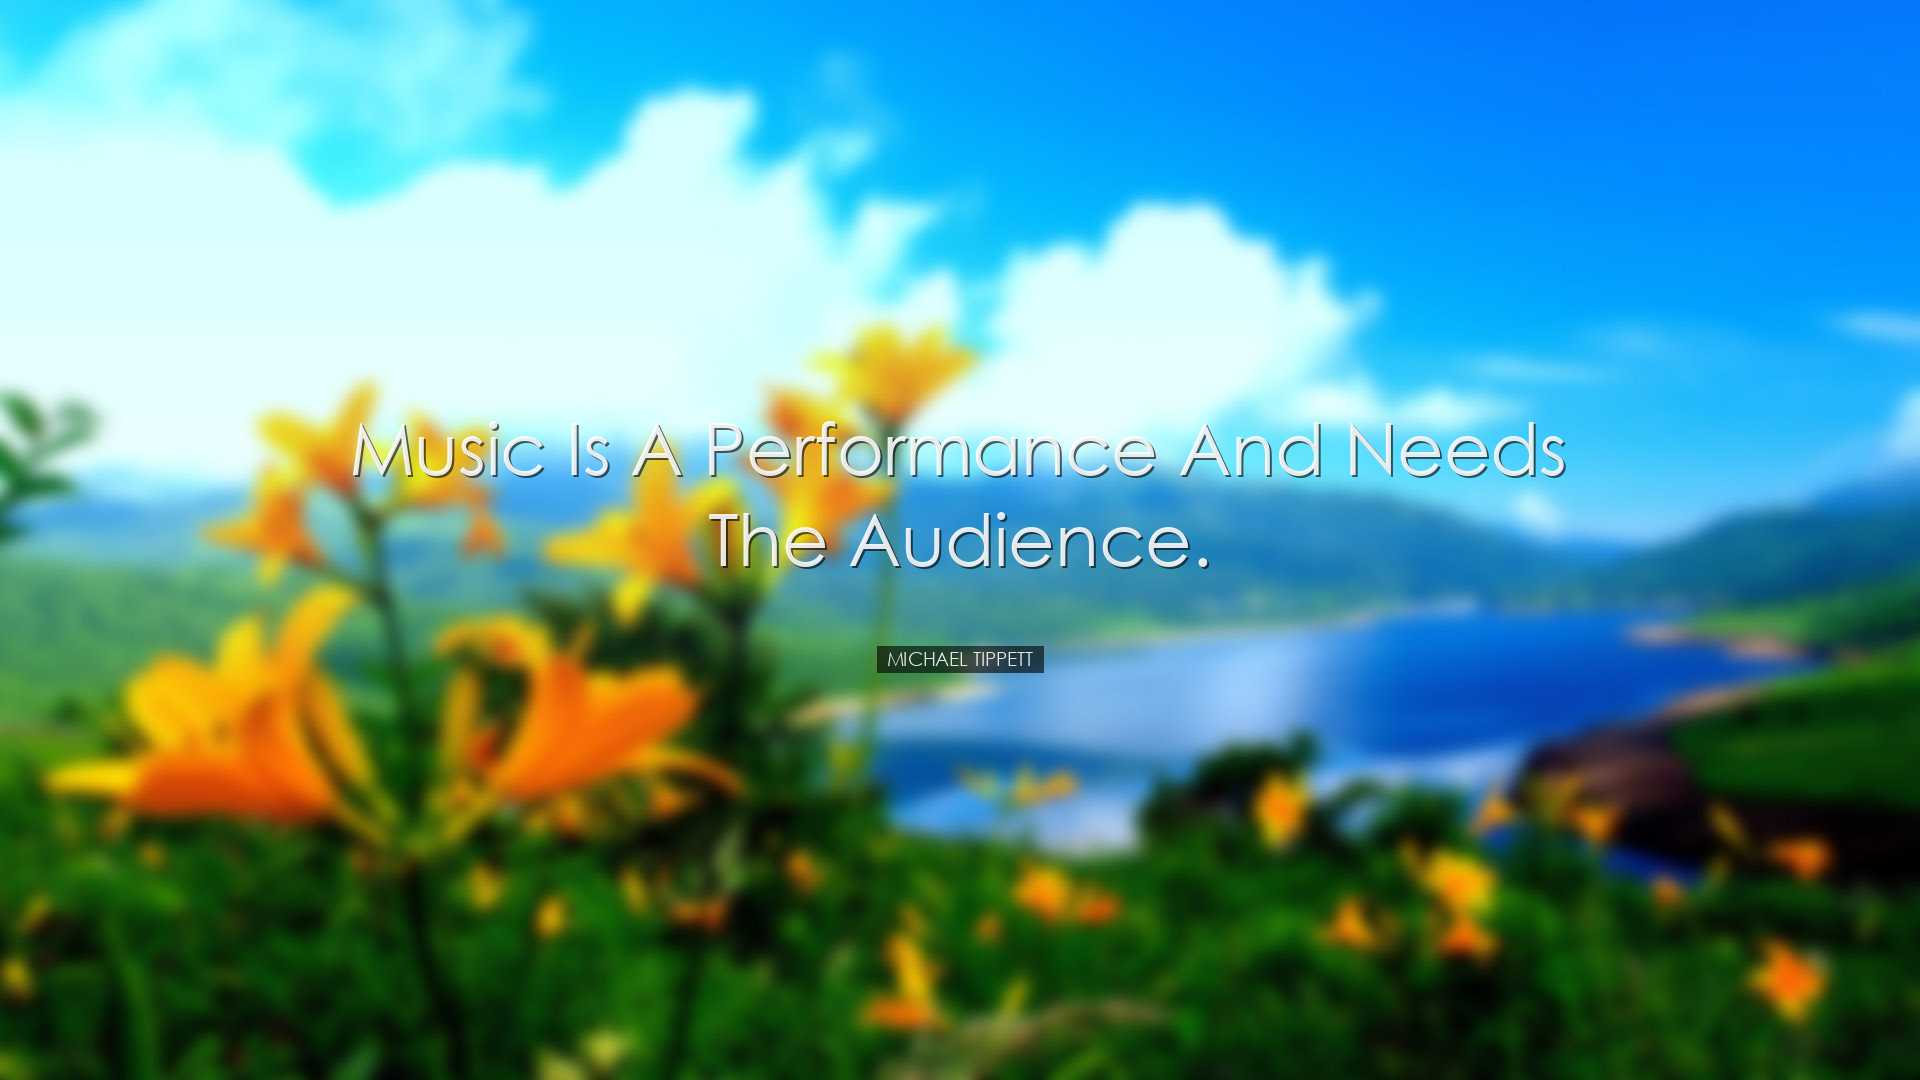 Music is a performance and needs the audience. - Michael Tippett